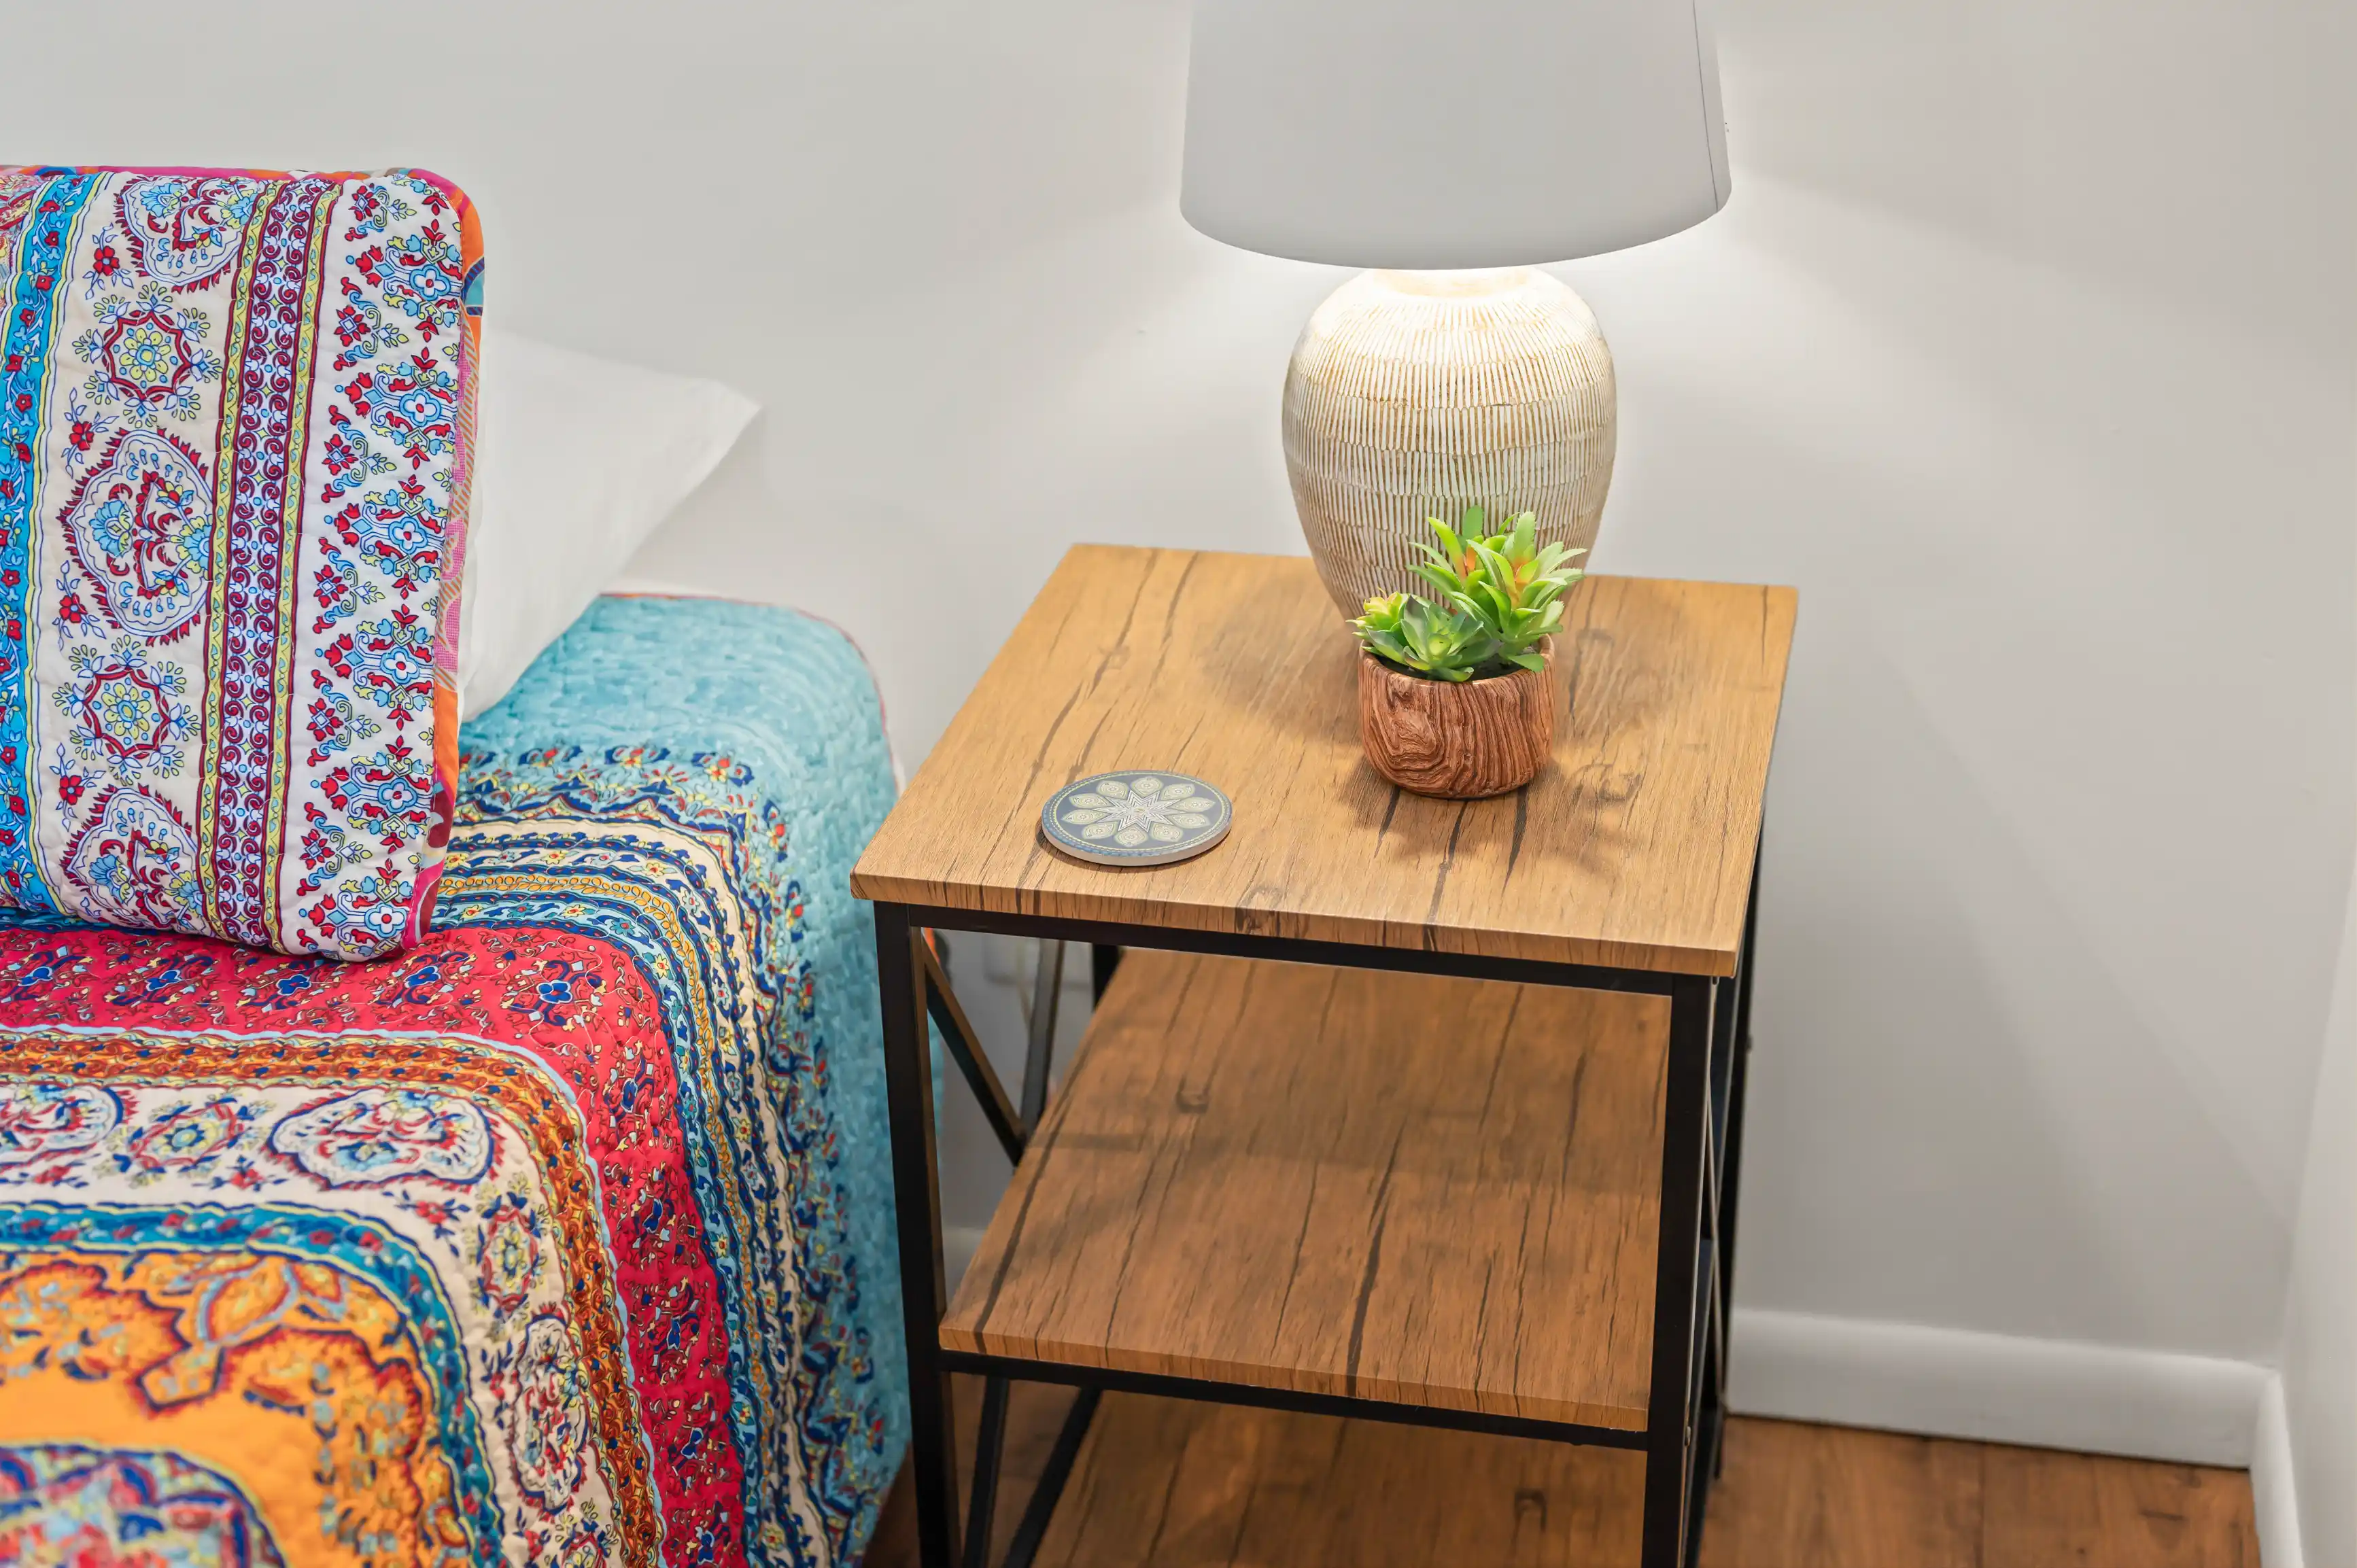 Cozy corner with a colorful patterned bedspread and a nightstand featuring a ceramic lamp and a small potted plant.